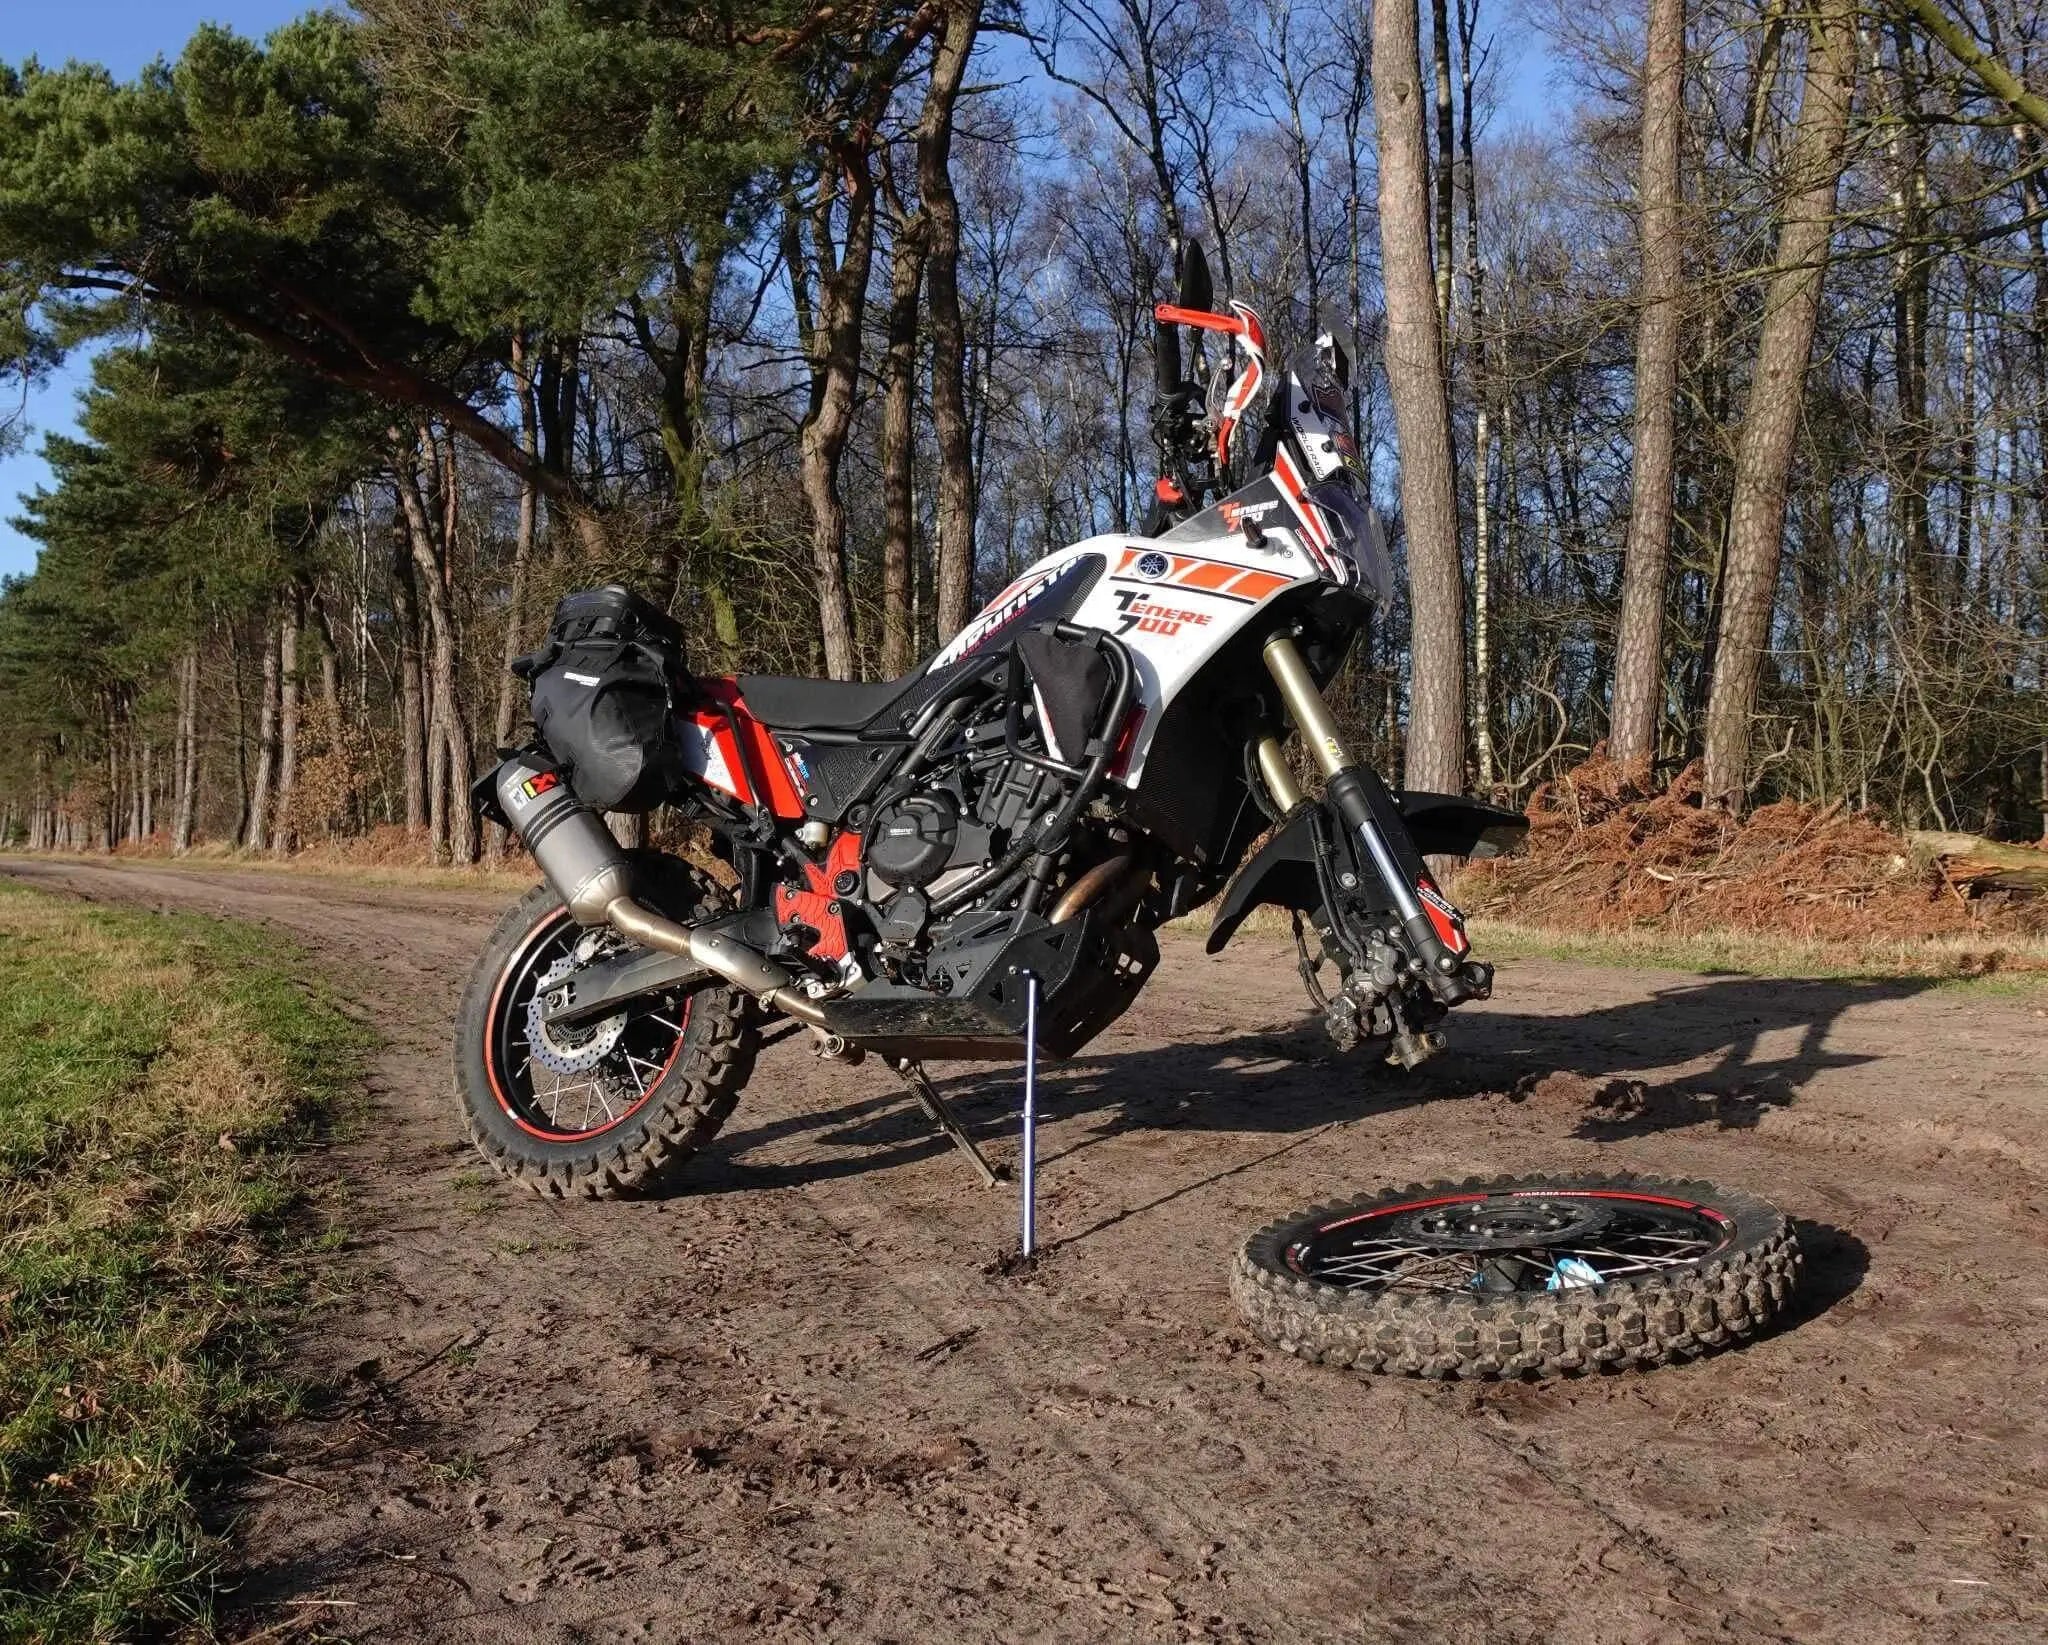 Rolling Mavericks Ultralight Enduro Trail Jack Stand 3.0 - Lightweight Motorcycle Trail Jack- Supports Up to 240kg - Compact & Portable